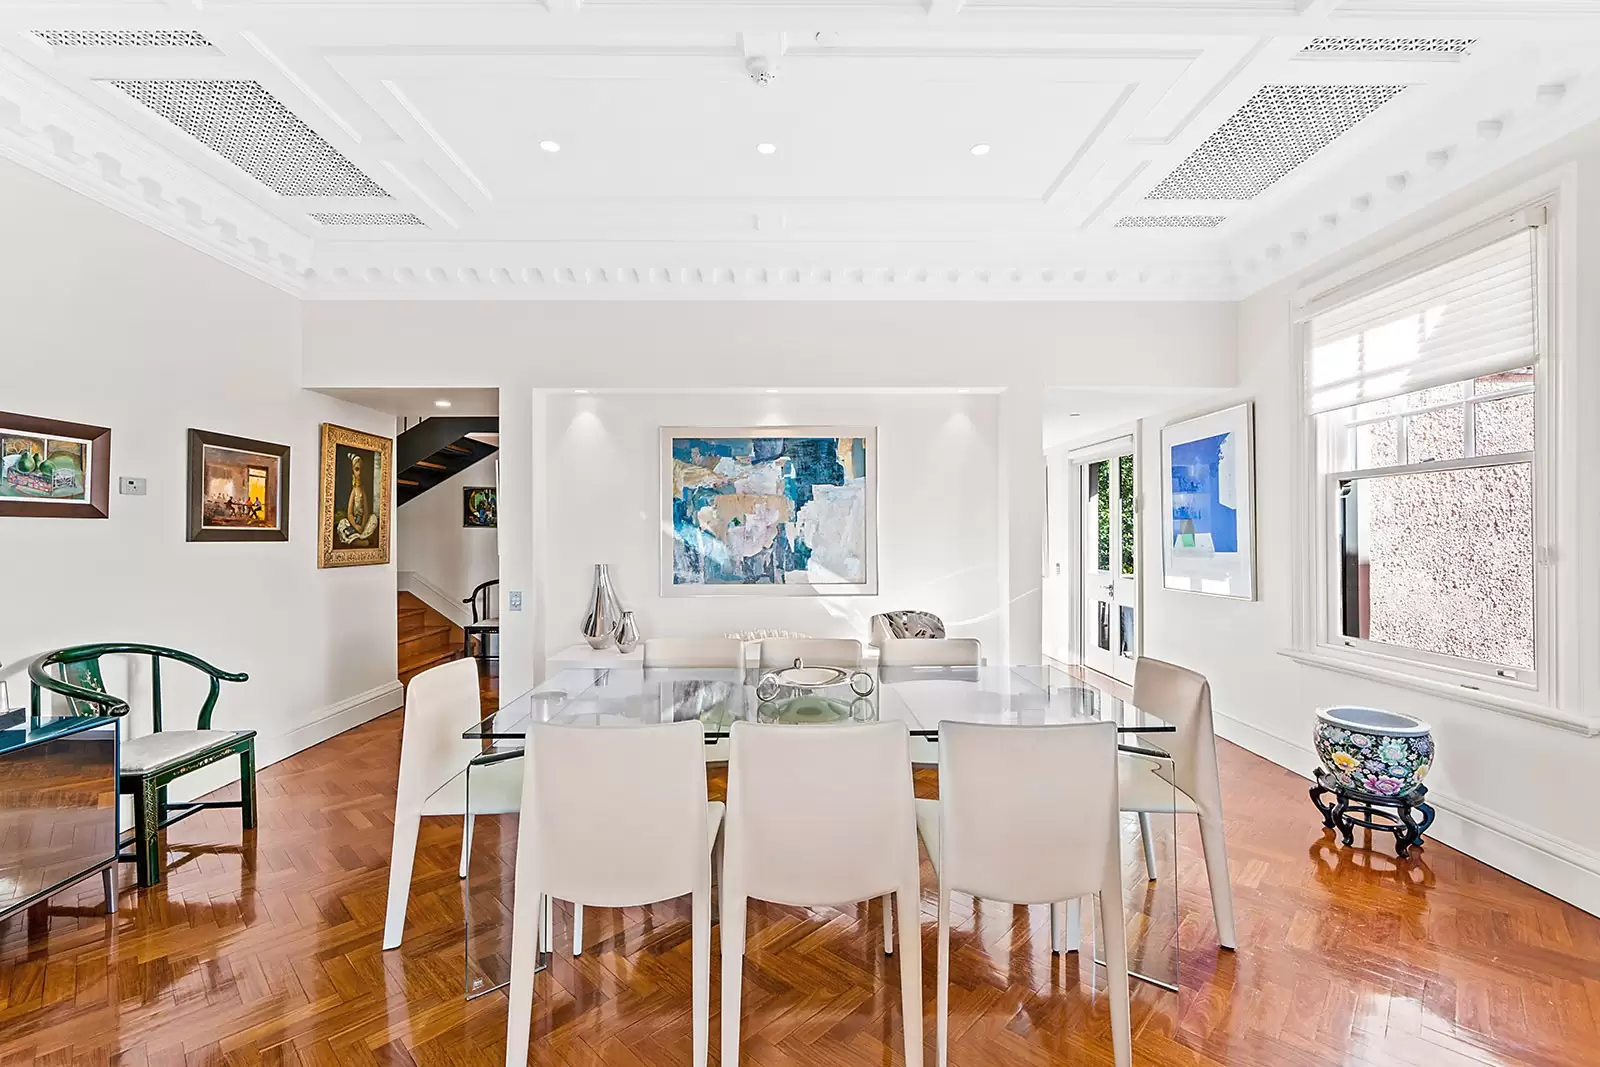 Photo #8: 4/23 Wentworth Street, Point Piper - Sold by Sydney Sotheby's International Realty